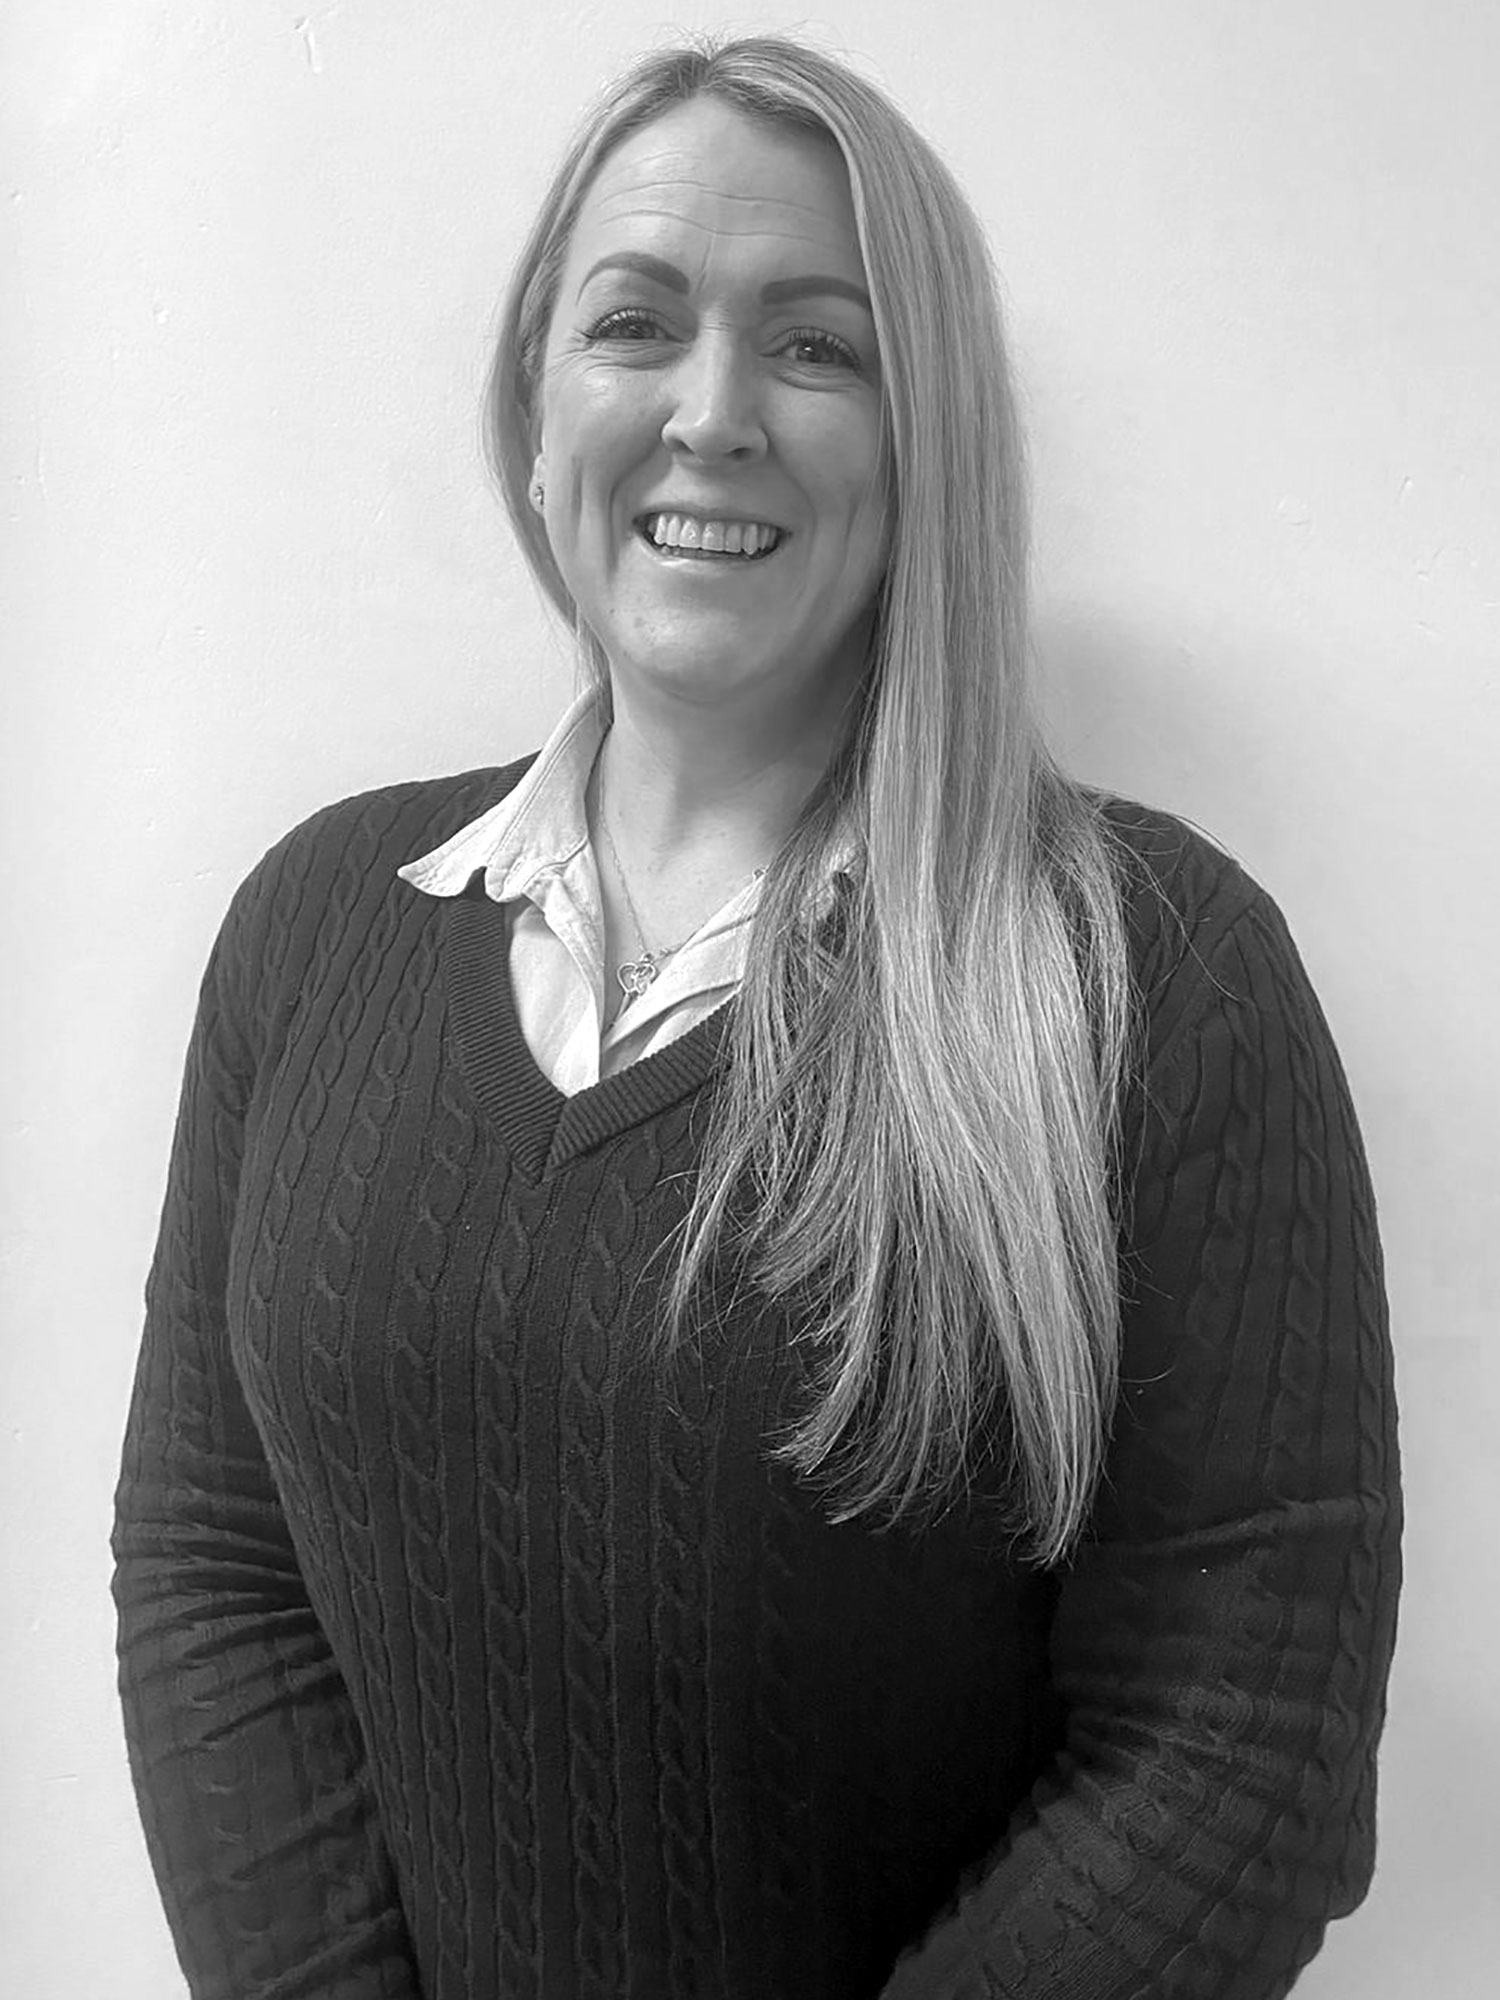 Catherine Barnes - Trainee Solicitor in the Wills and Probate Department specialising in Will Drafting, Probate, LPAs, and elderly care advice.